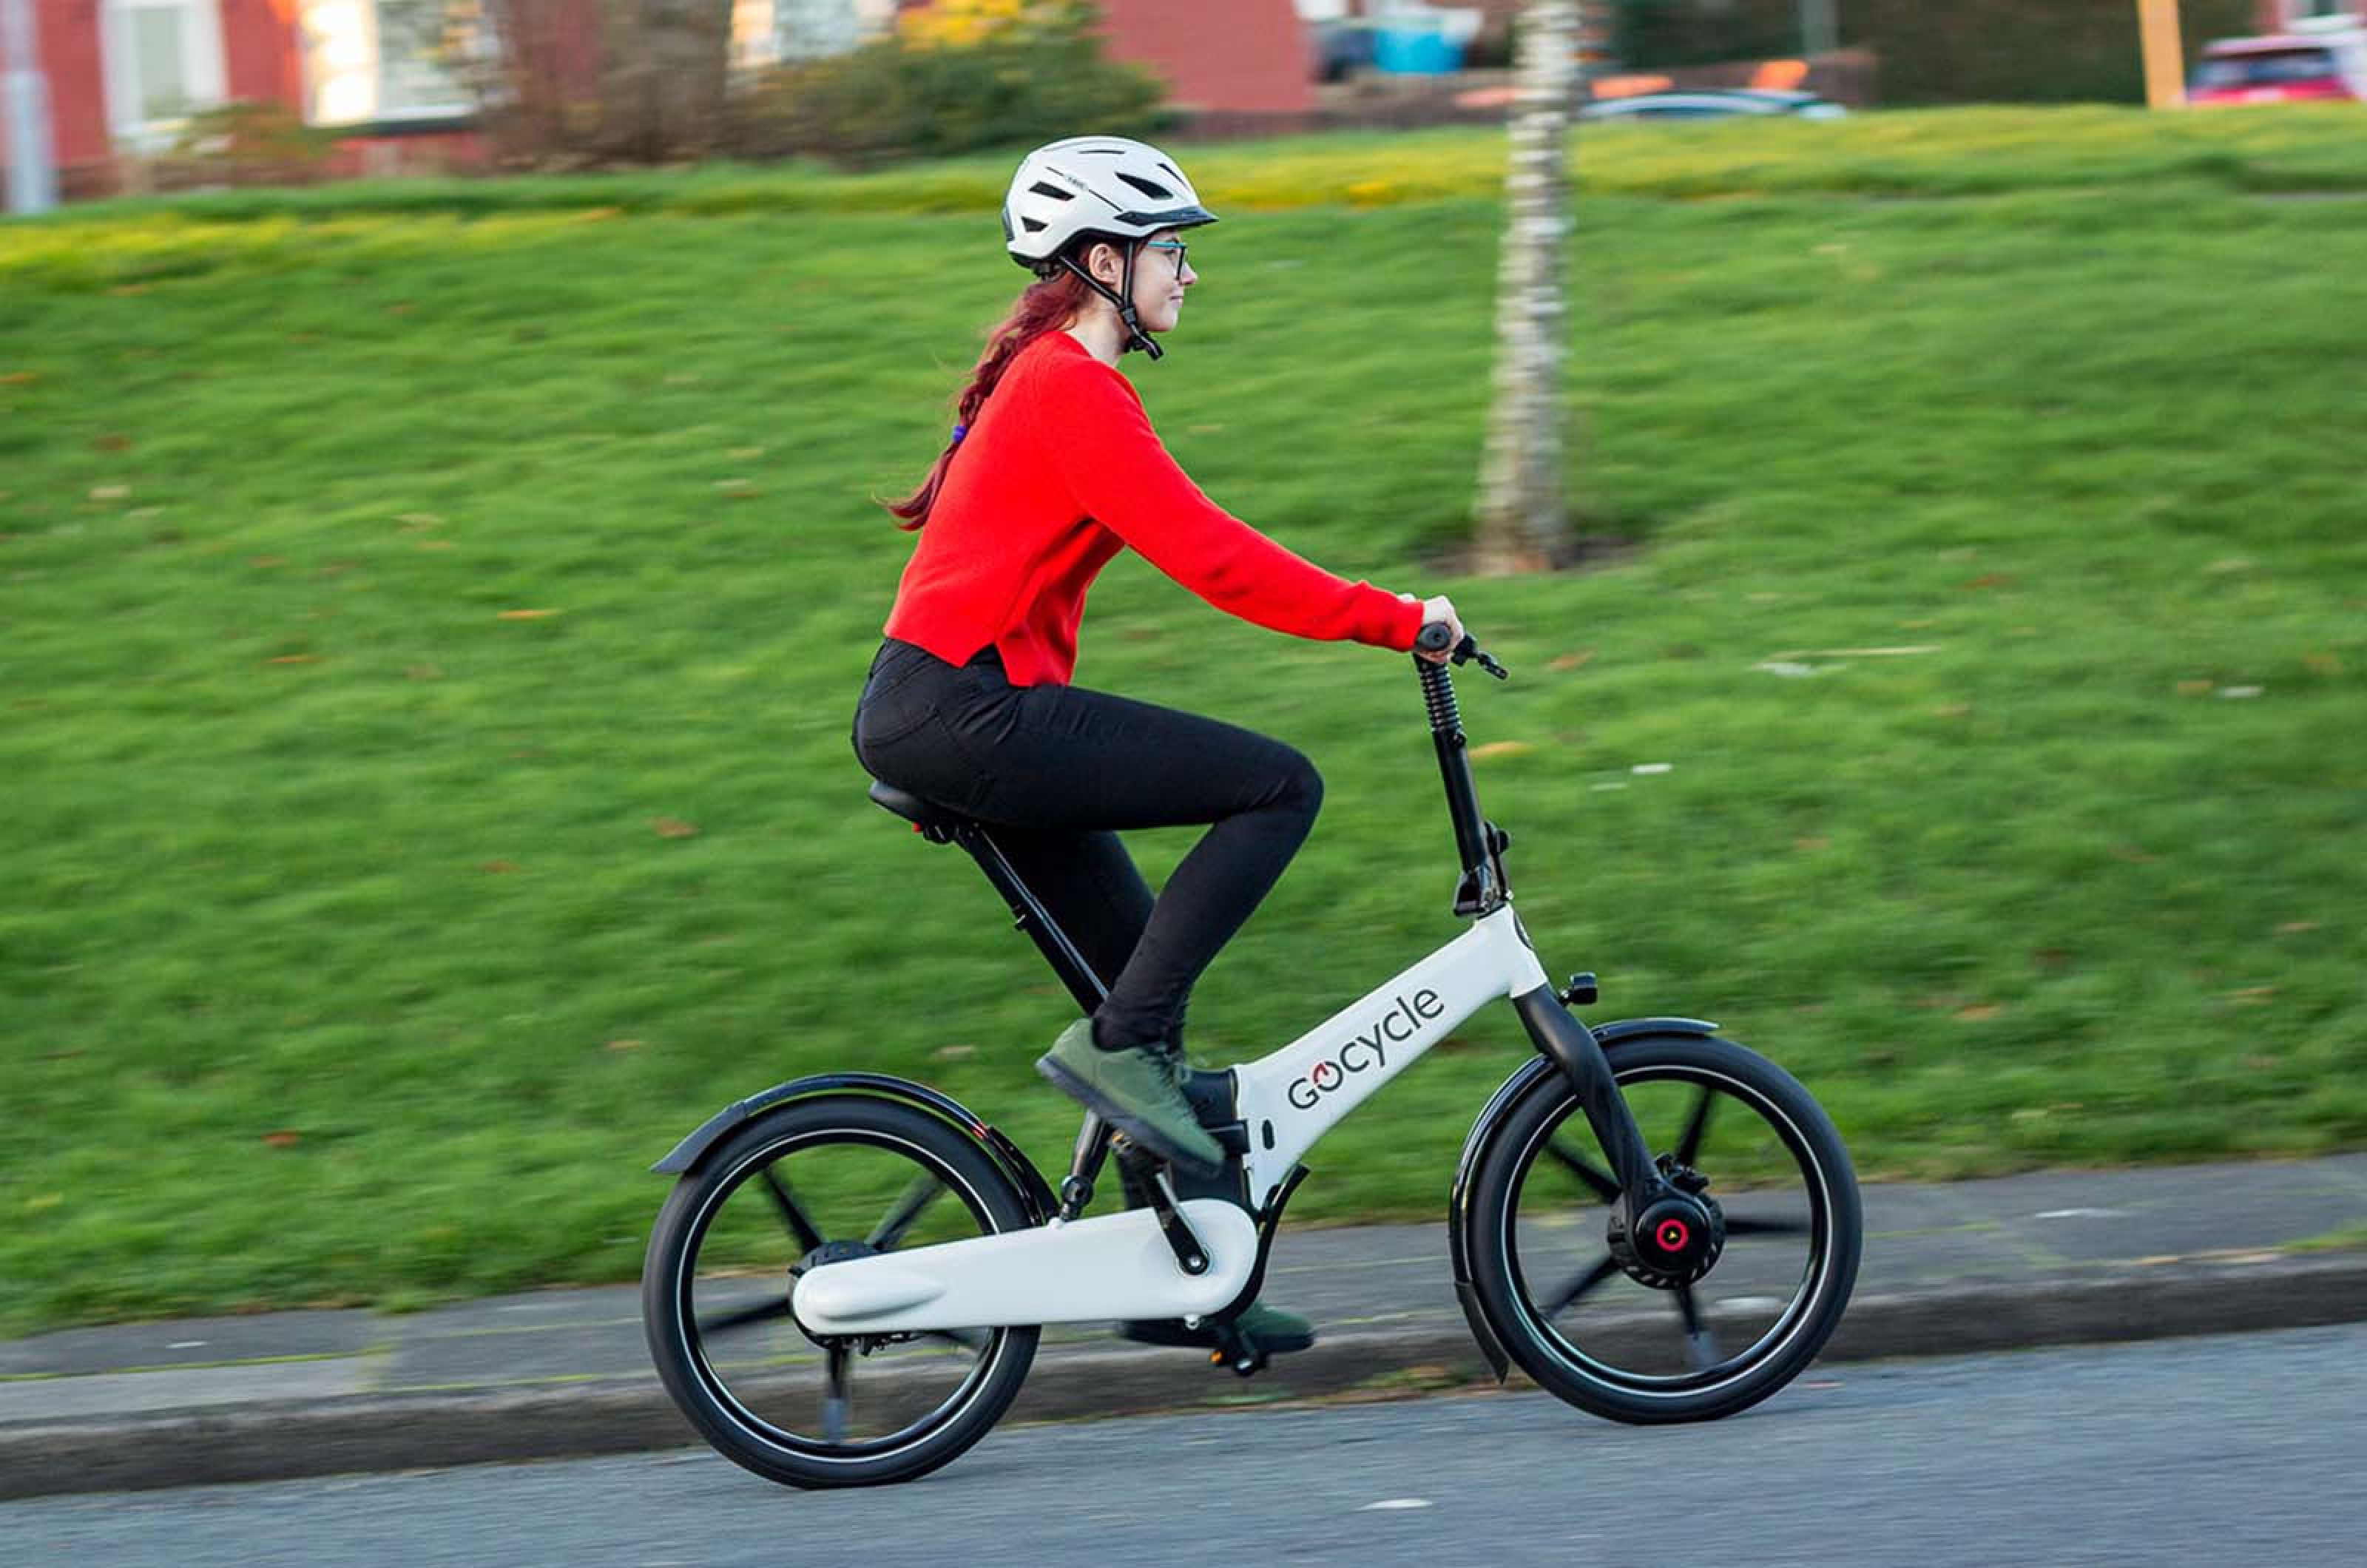 <p>From its sleek design, to the excellent motor, the Gocycle G4i is a brilliant electric bike that offers the ride quality of a large machine, and has great portability thanks to its seamless folding mechanism. The three-speed gearbox pairs nicely with the G4drive motor which further adds to the G4i’s smooth ride. </p>  <p>The carbonfibre mid-frame helps shave some weight off, too, making it lighter than the standard G4 model. Range is up to 50 miles, depending on pedal inputs. </p>